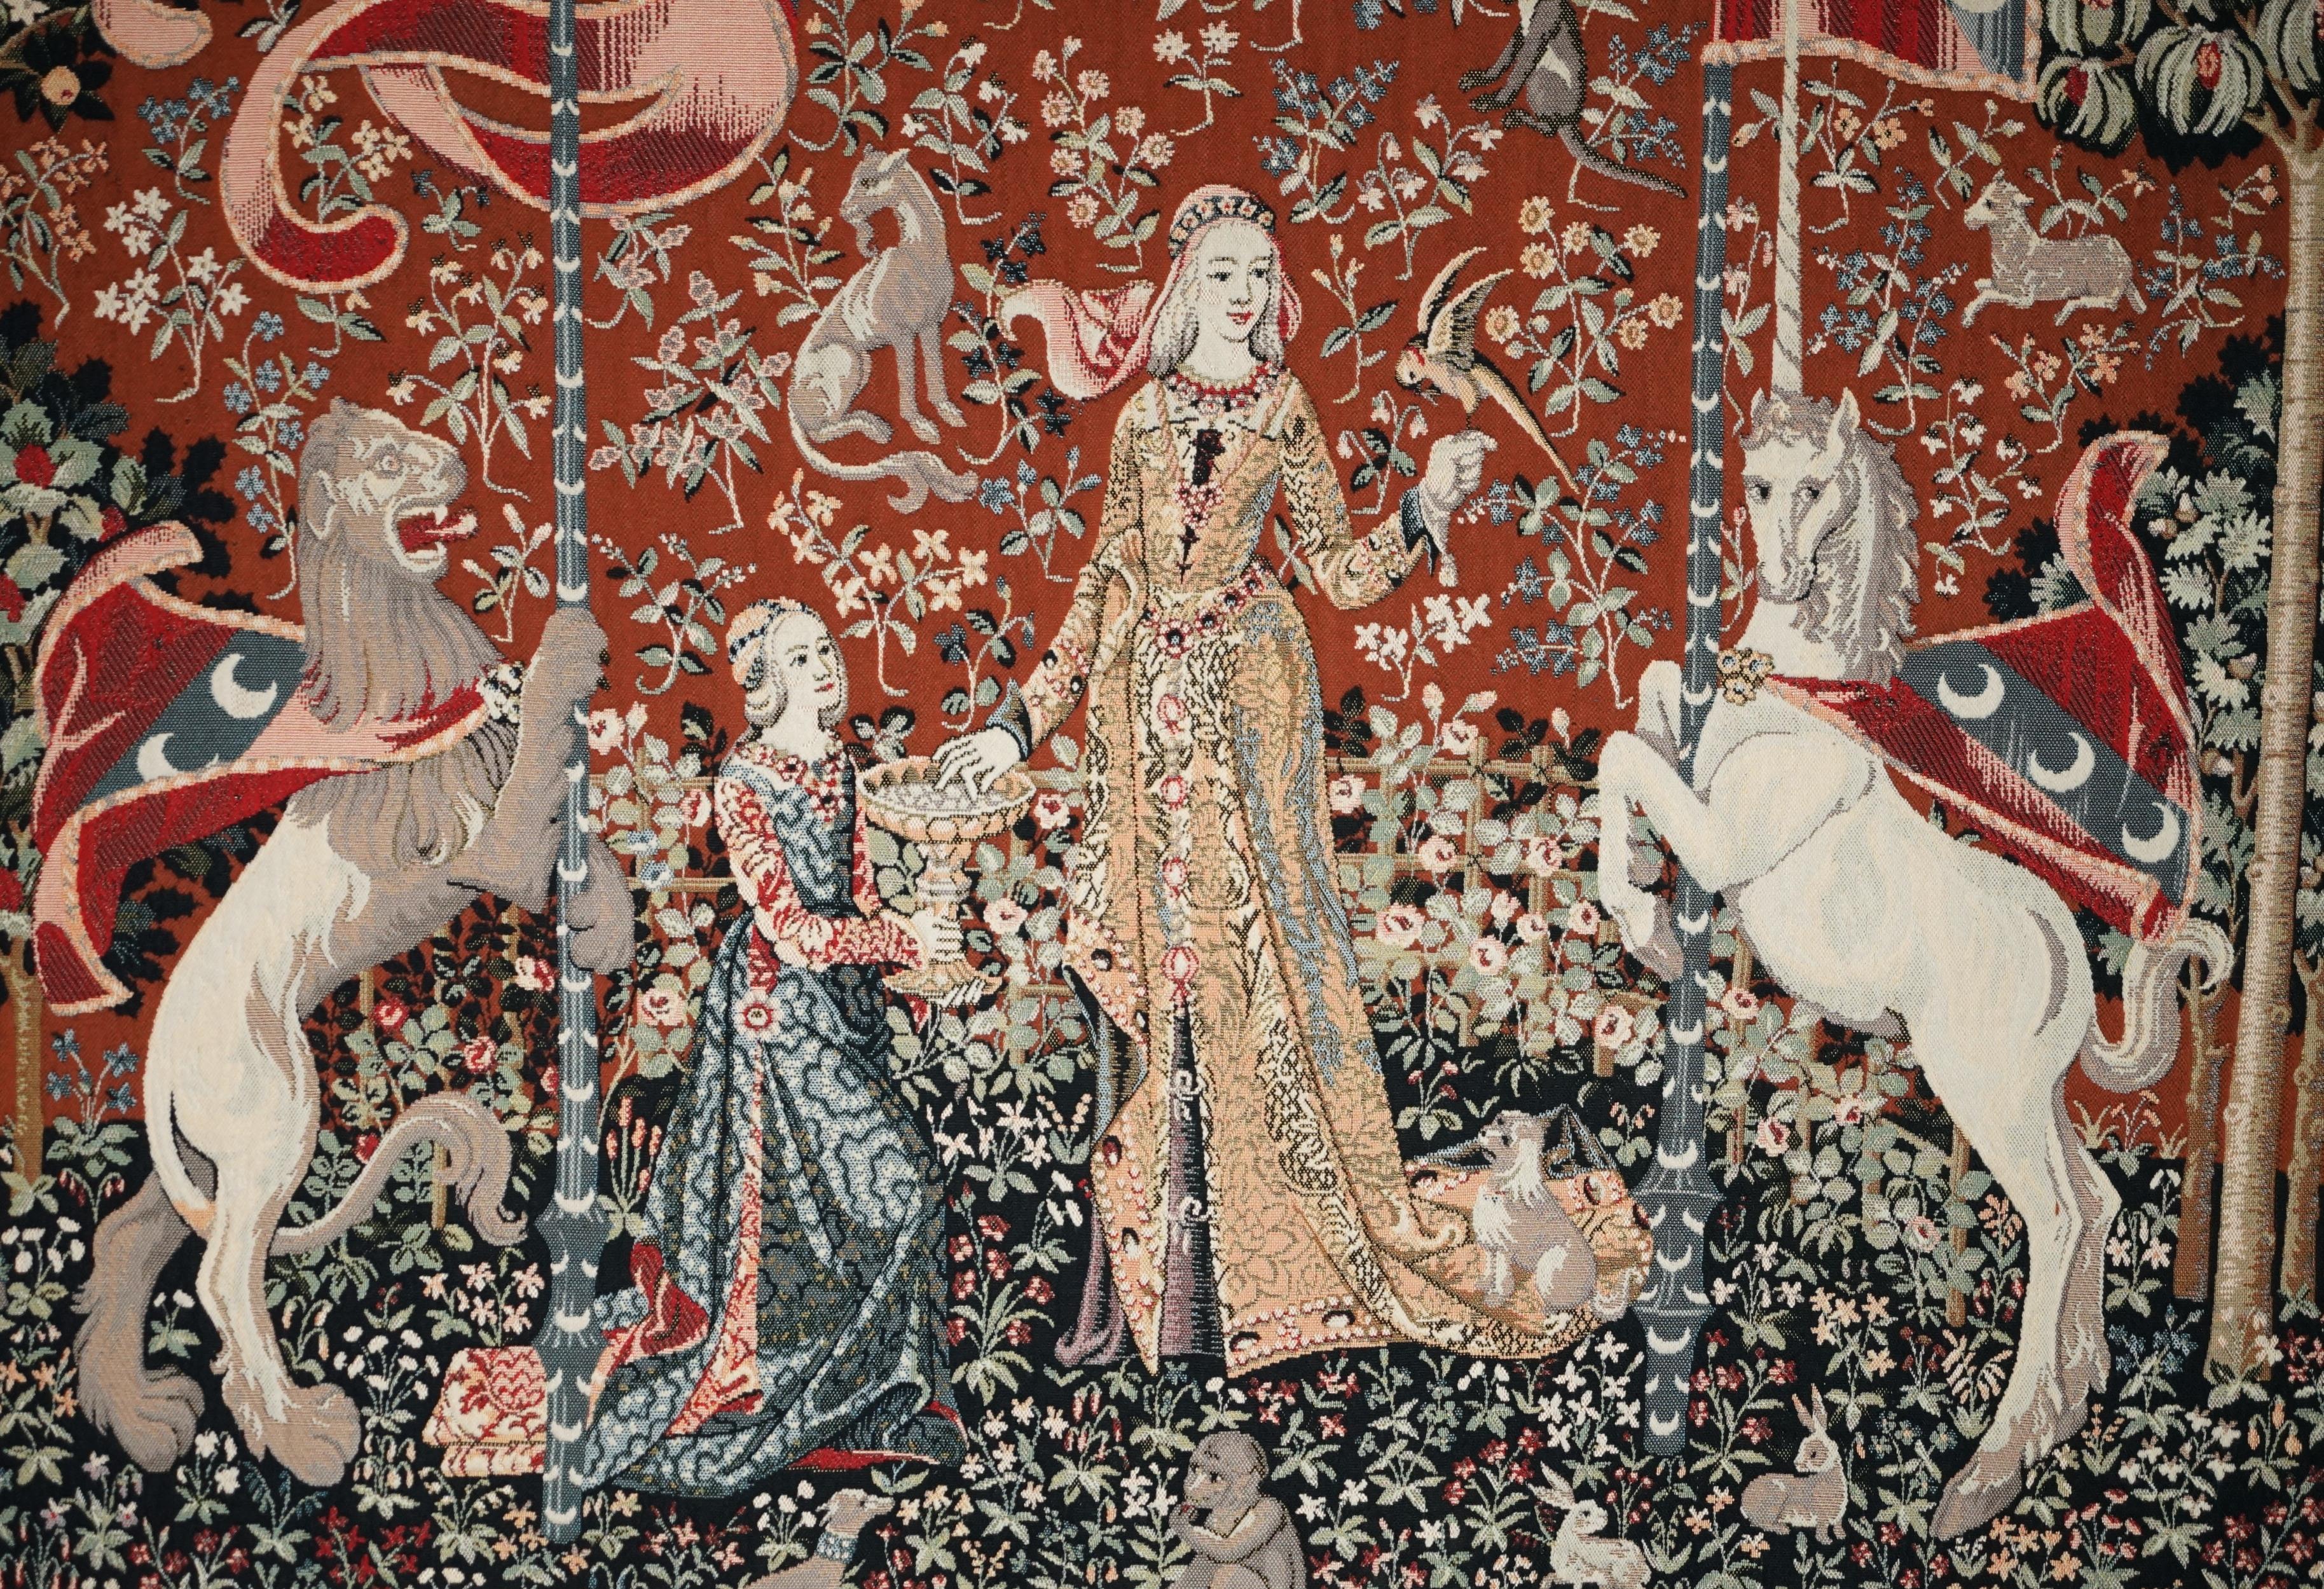 Edwardian ViNTAGE THE LADY AND THE UNICORN LARGE WALL HANGING WOVEN TAPESTRY 216CM X 189CM For Sale